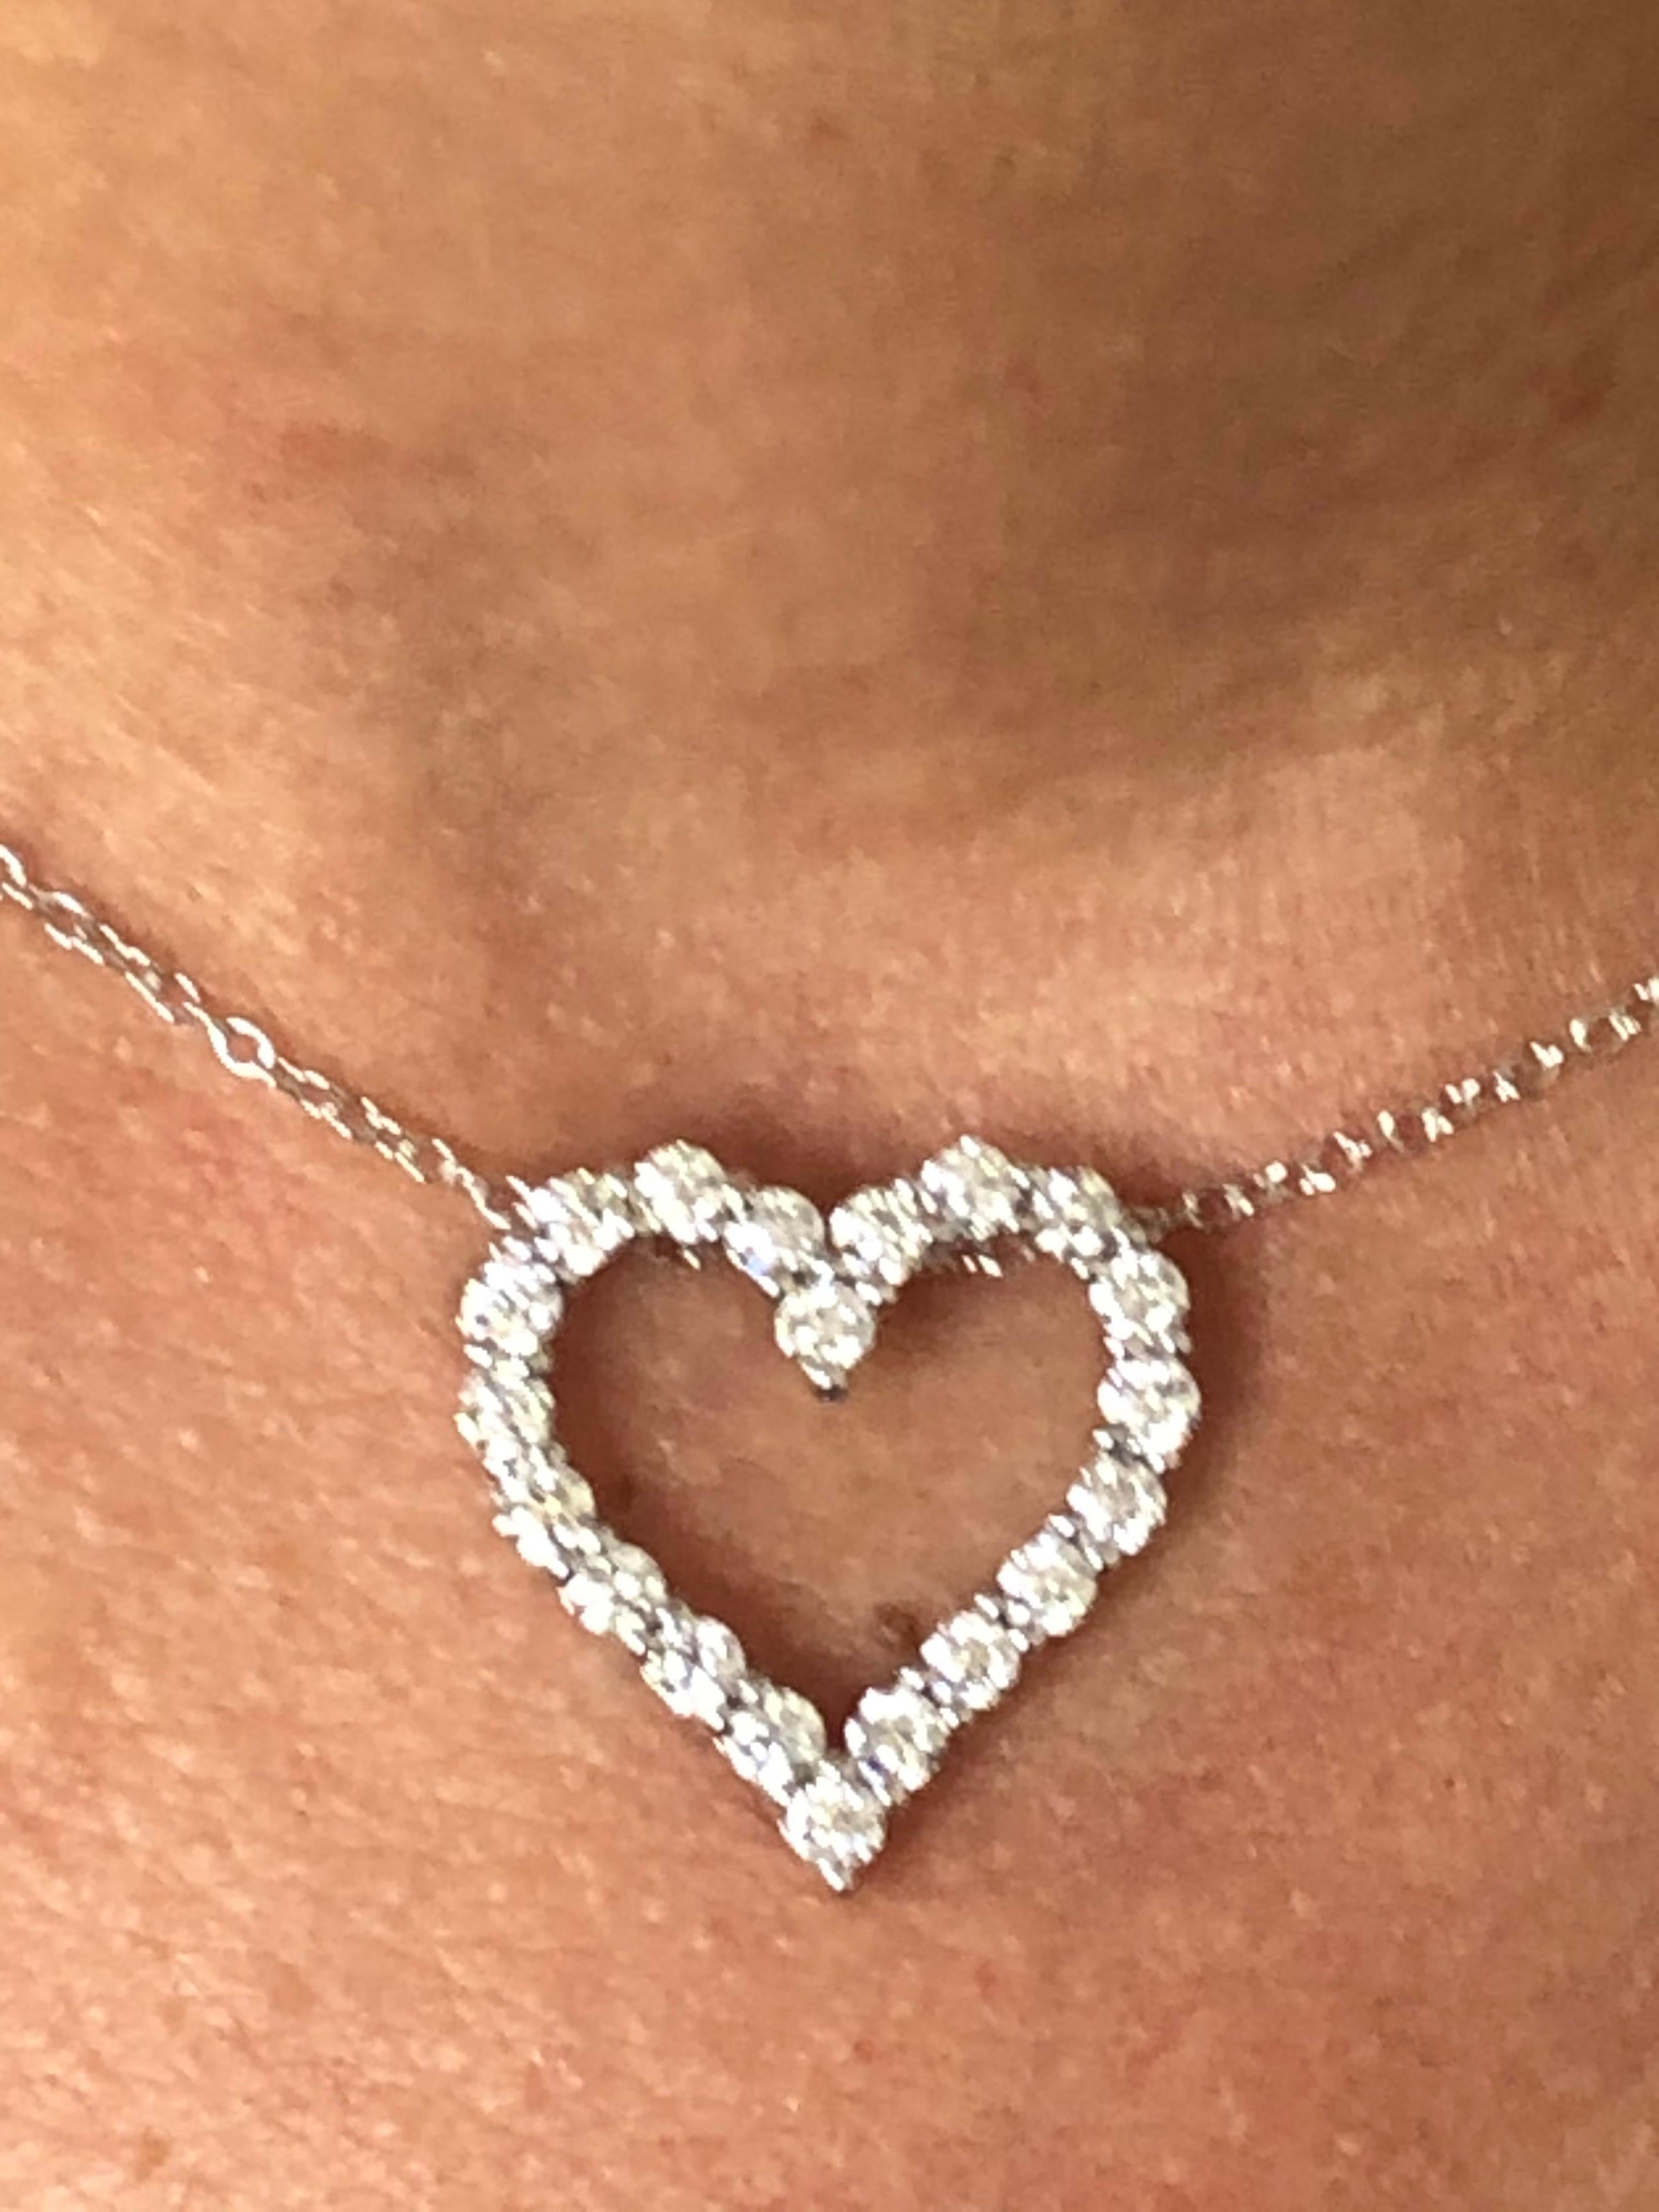 Diamond heart pendant set in 14K white gold. The pendant is set with 20 stones each weighing 0.07 carats. The total weight is 1.40 carats. The color of the stones are G-H, the clarity is SI. The heart is set on an 18 inch chain.